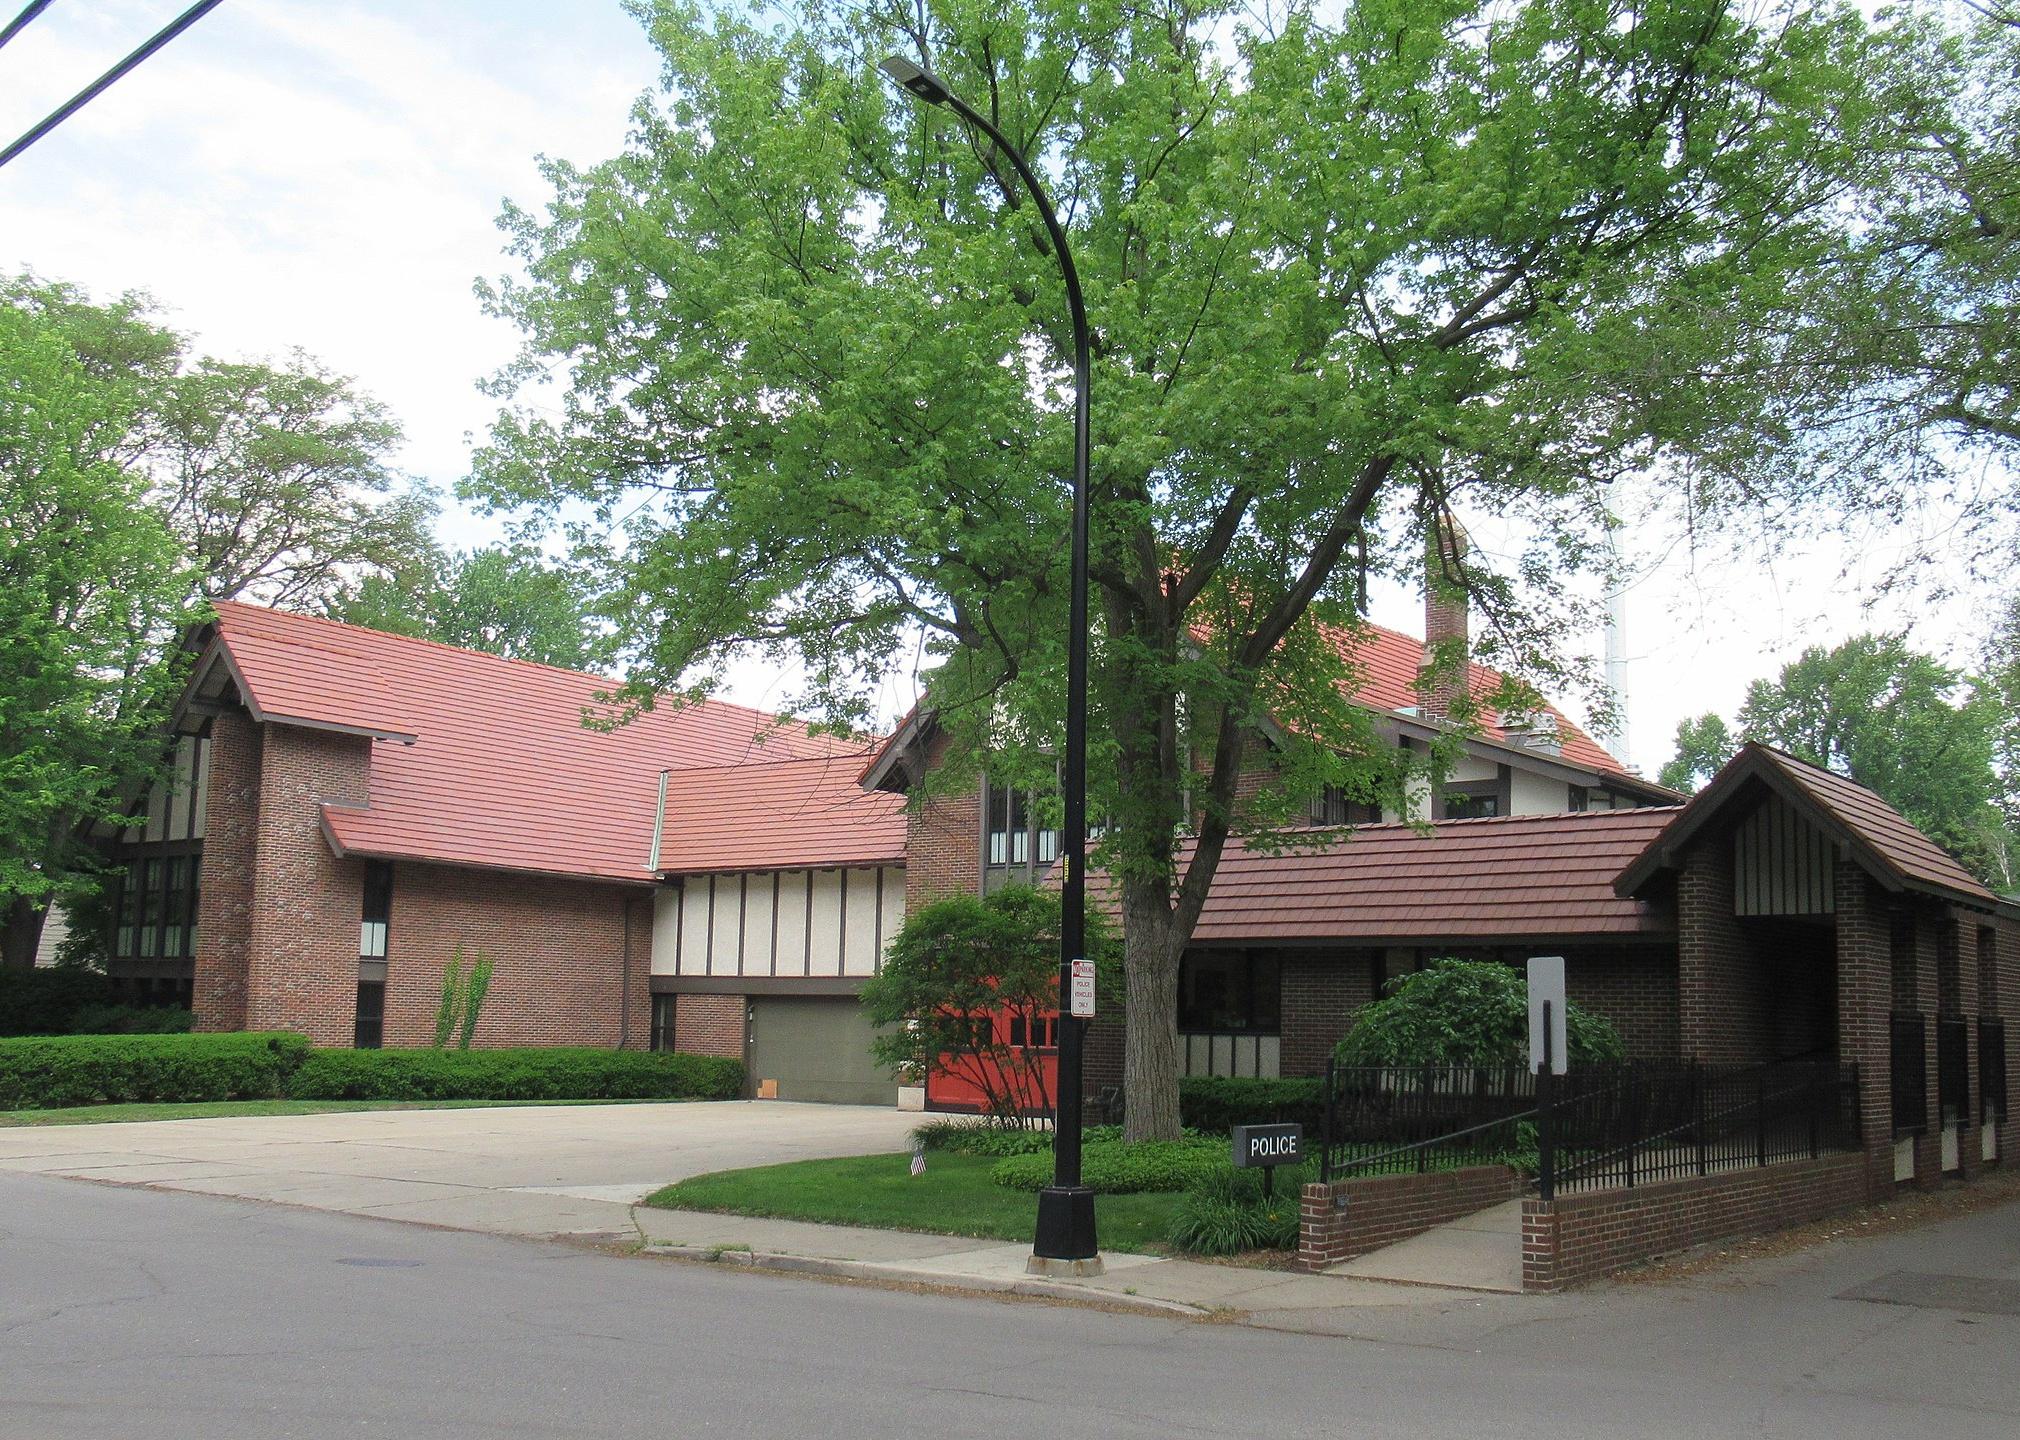 Grosse Pointe Farms City Offices.